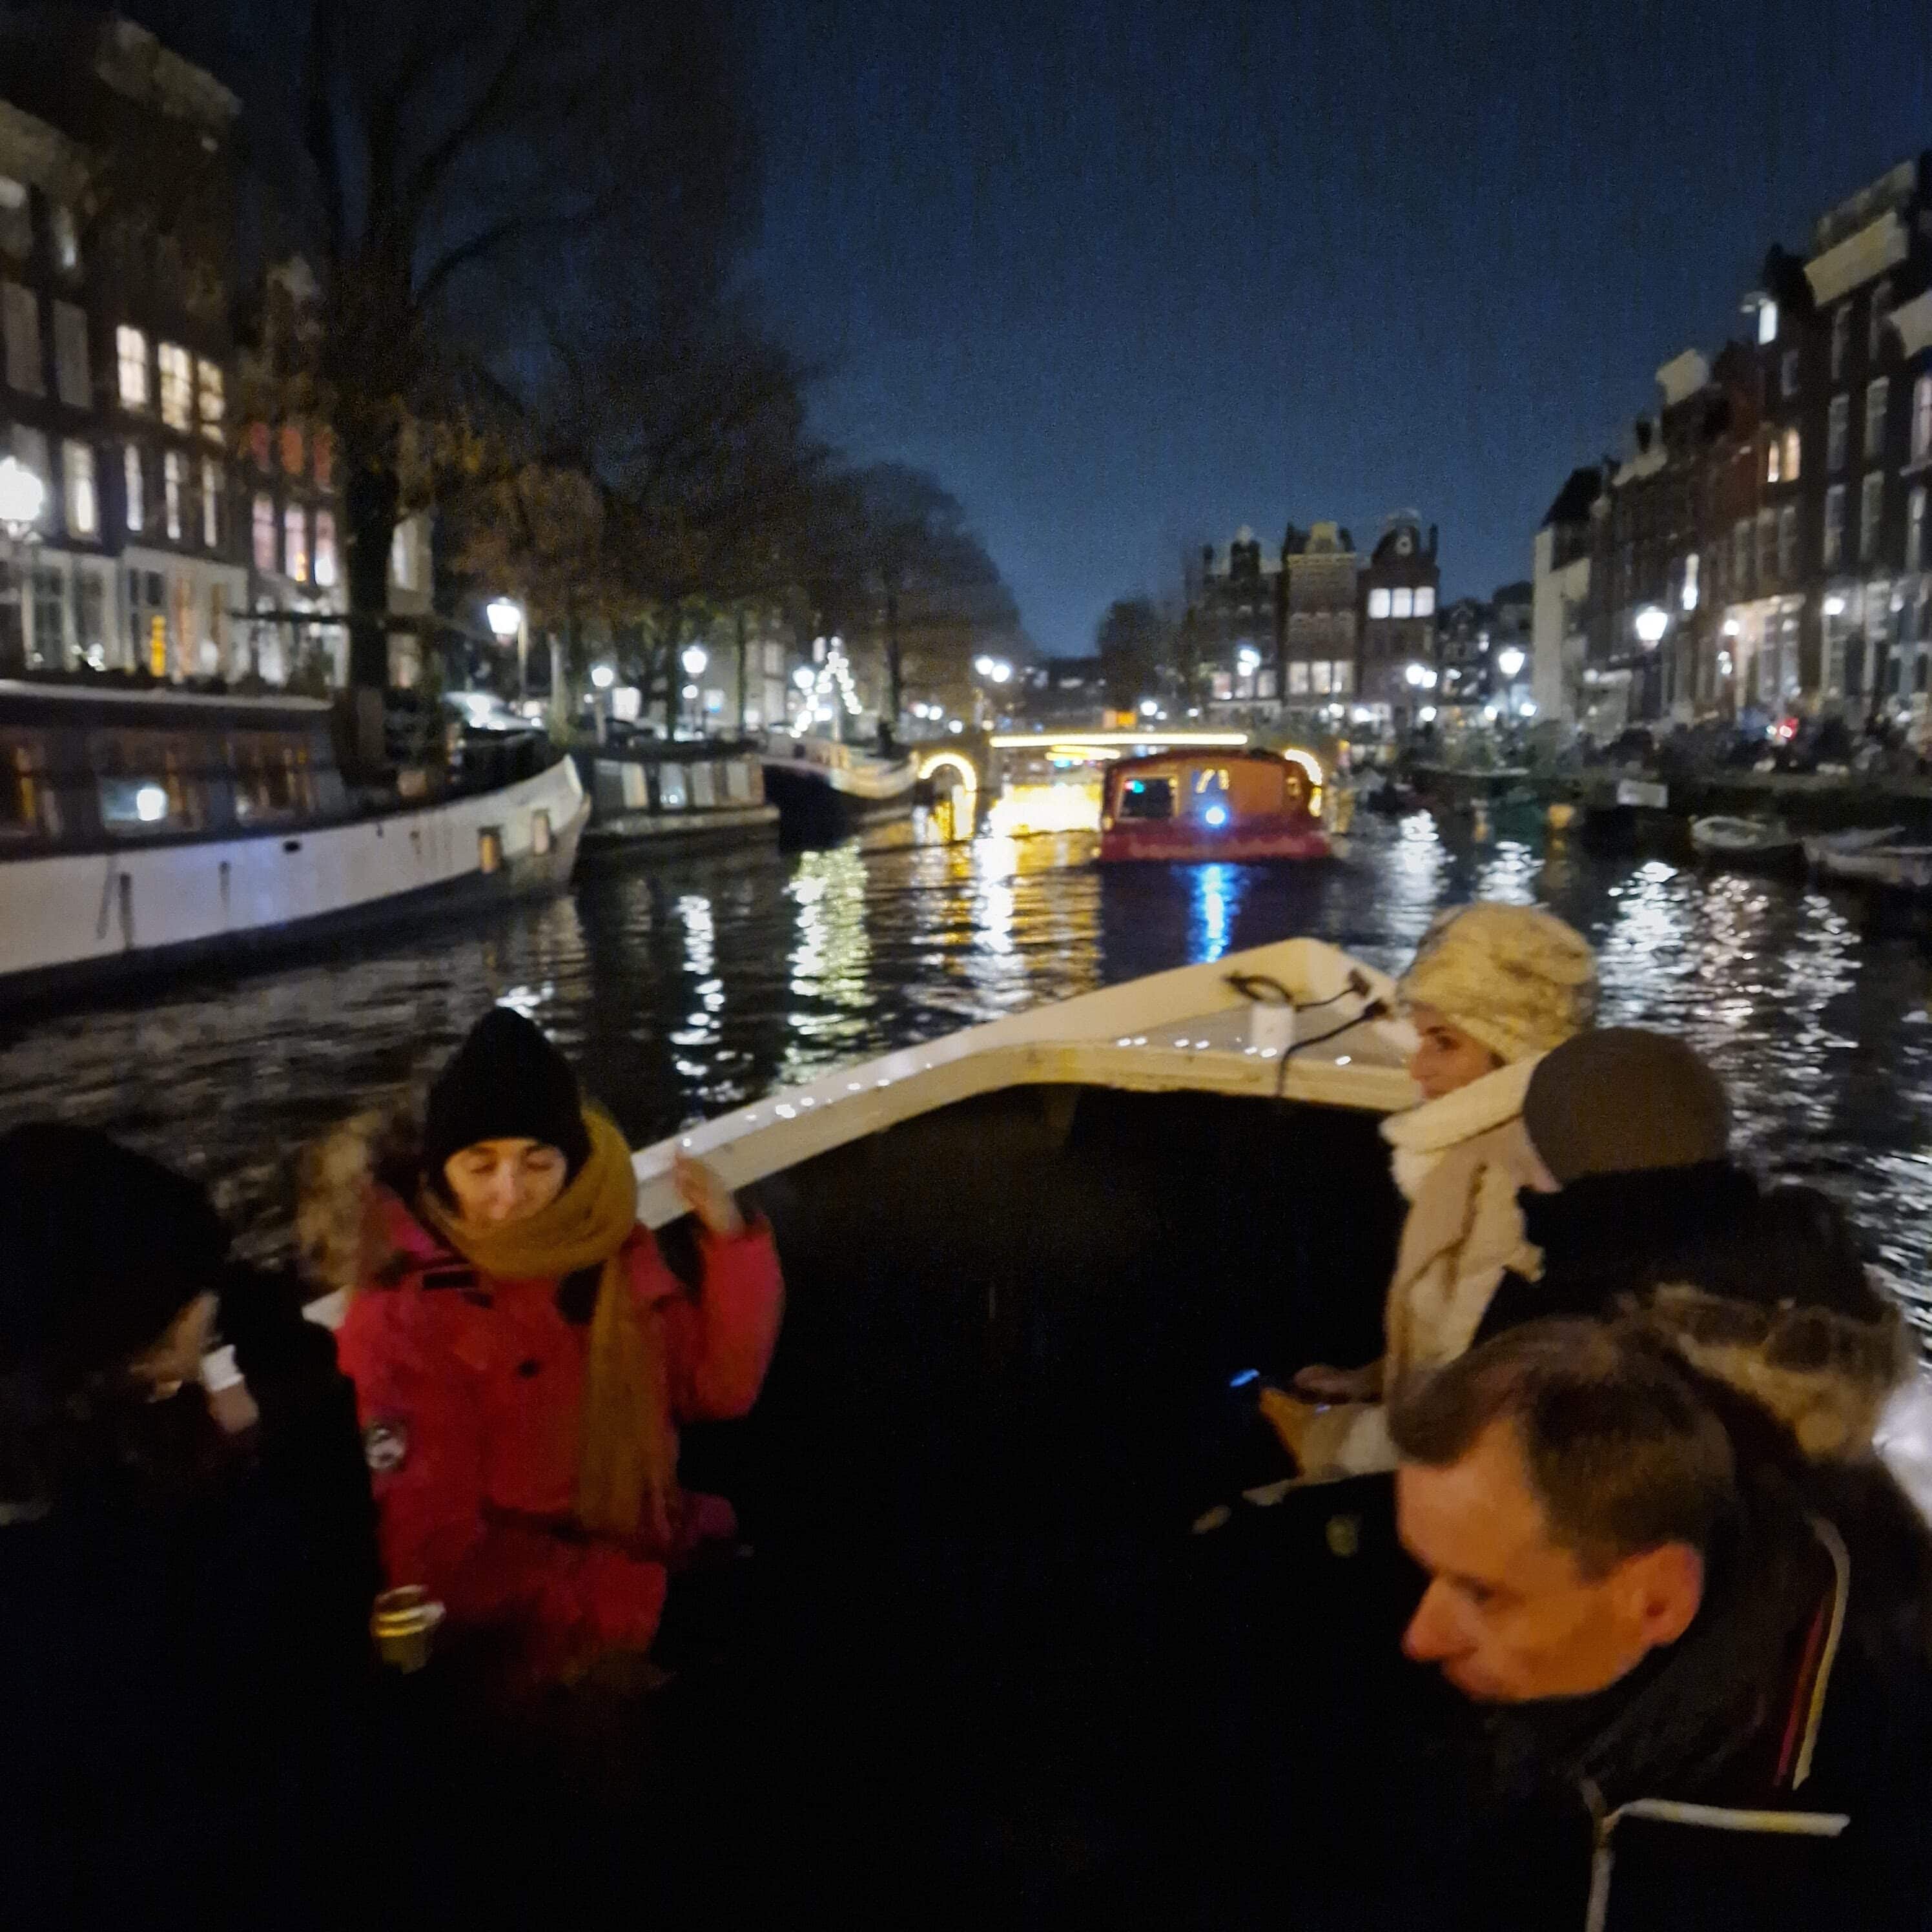 Sailing Saetta guests bundled up for an enchanting evening canal cruise in Amsterdam's illuminated waterways.